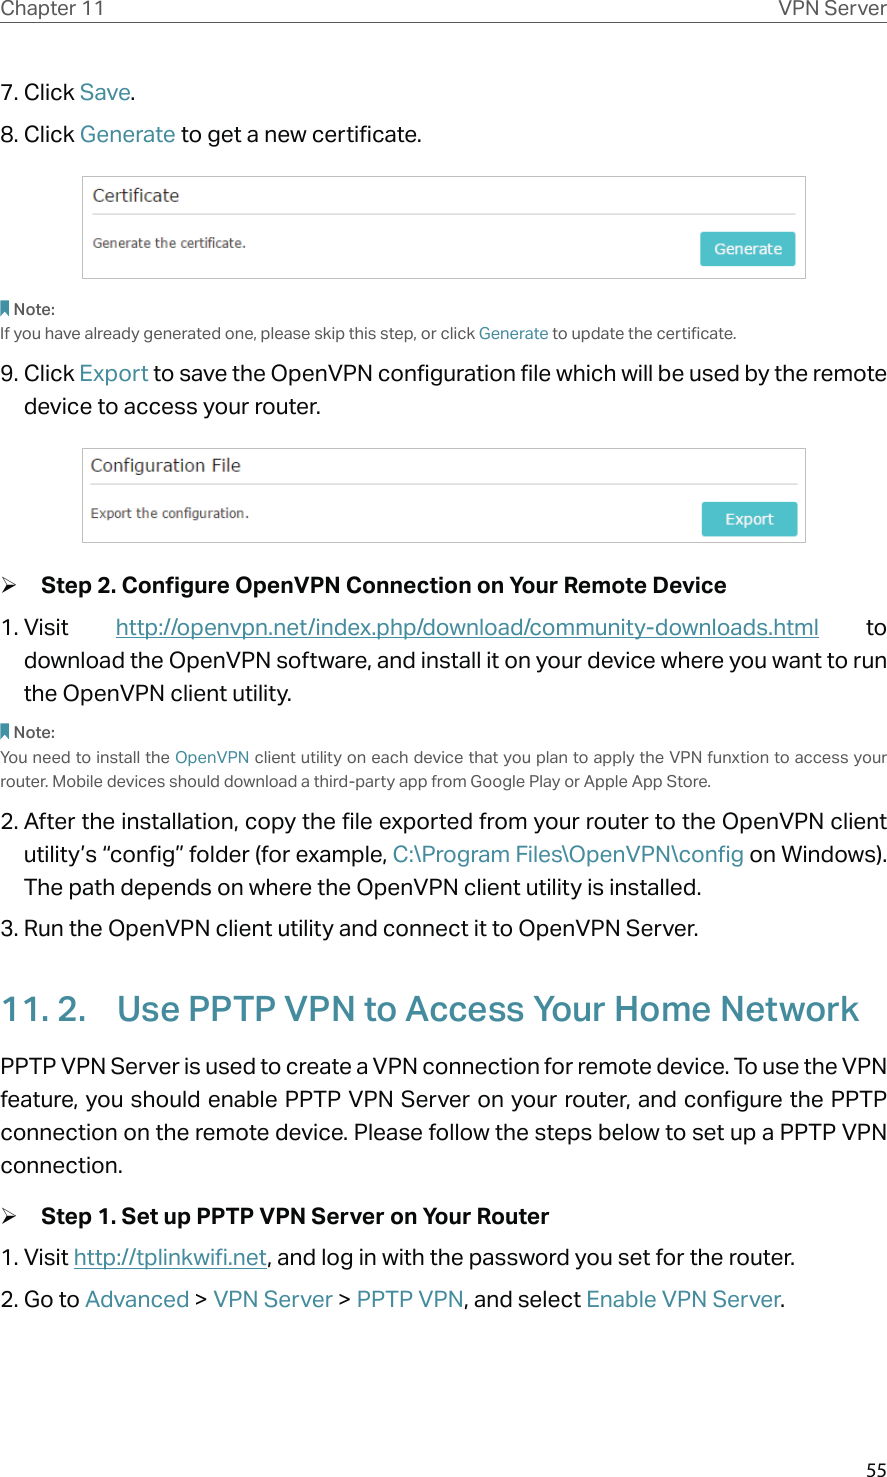 55Chapter 11 VPN Server7. Click Save.8. Click Generate to get a new certificate. Note:If you have already generated one, please skip this step, or click Generate to update the certificate.9. Click Export to save the OpenVPN configuration file which will be used by the remote device to access your router. ¾Step 2. Configure OpenVPN Connection on Your Remote Device1. Visit  http://openvpn.net/index.php/download/community-downloads.html to download the OpenVPN software, and install it on your device where you want to run the OpenVPN client utility.Note:You need to install the OpenVPN client utility on each device that you plan to apply the VPN funxtion to access your router. Mobile devices should download a third-party app from Google Play or Apple App Store.2. After the installation, copy the file exported from your router to the OpenVPN client utility’s “config” folder (for example, C:\Program Files\OpenVPN\config on Windows). The path depends on where the OpenVPN client utility is installed.3. Run the OpenVPN client utility and connect it to OpenVPN Server.11. 2.  Use PPTP VPN to Access Your Home NetworkPPTP VPN Server is used to create a VPN connection for remote device. To use the VPN feature, you should enable PPTP VPN Server on your router, and configure the PPTP connection on the remote device. Please follow the steps below to set up a PPTP VPN connection. ¾Step 1. Set up PPTP VPN Server on Your Router1. Visit http://tplinkwifi.net, and log in with the password you set for the router.2. Go to Advanced &gt; VPN Server &gt; PPTP VPN, and select Enable VPN Server.